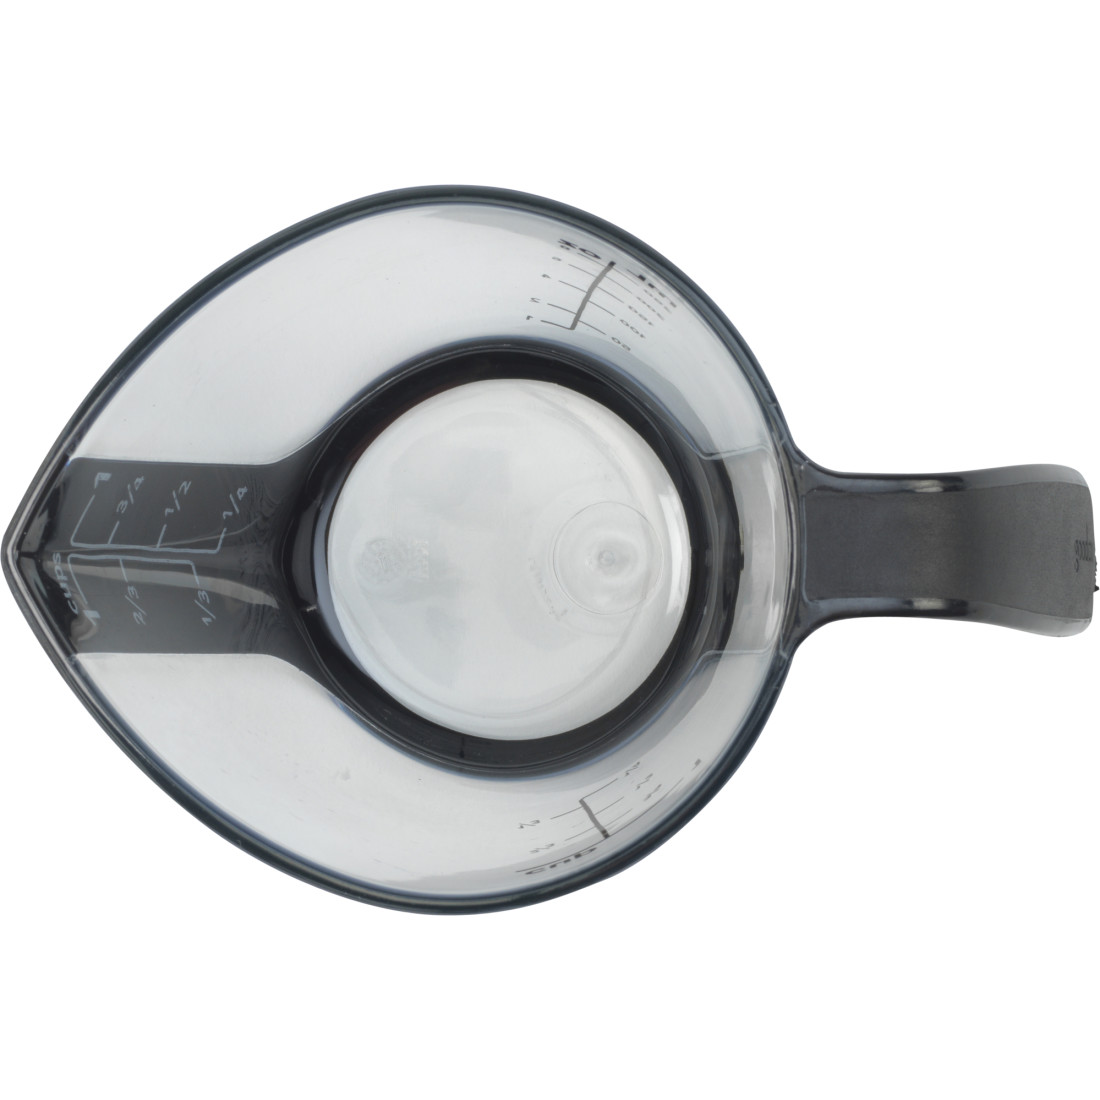 1-Cup Liquid Measuring Cup with Top-View Measuring - GoodCook